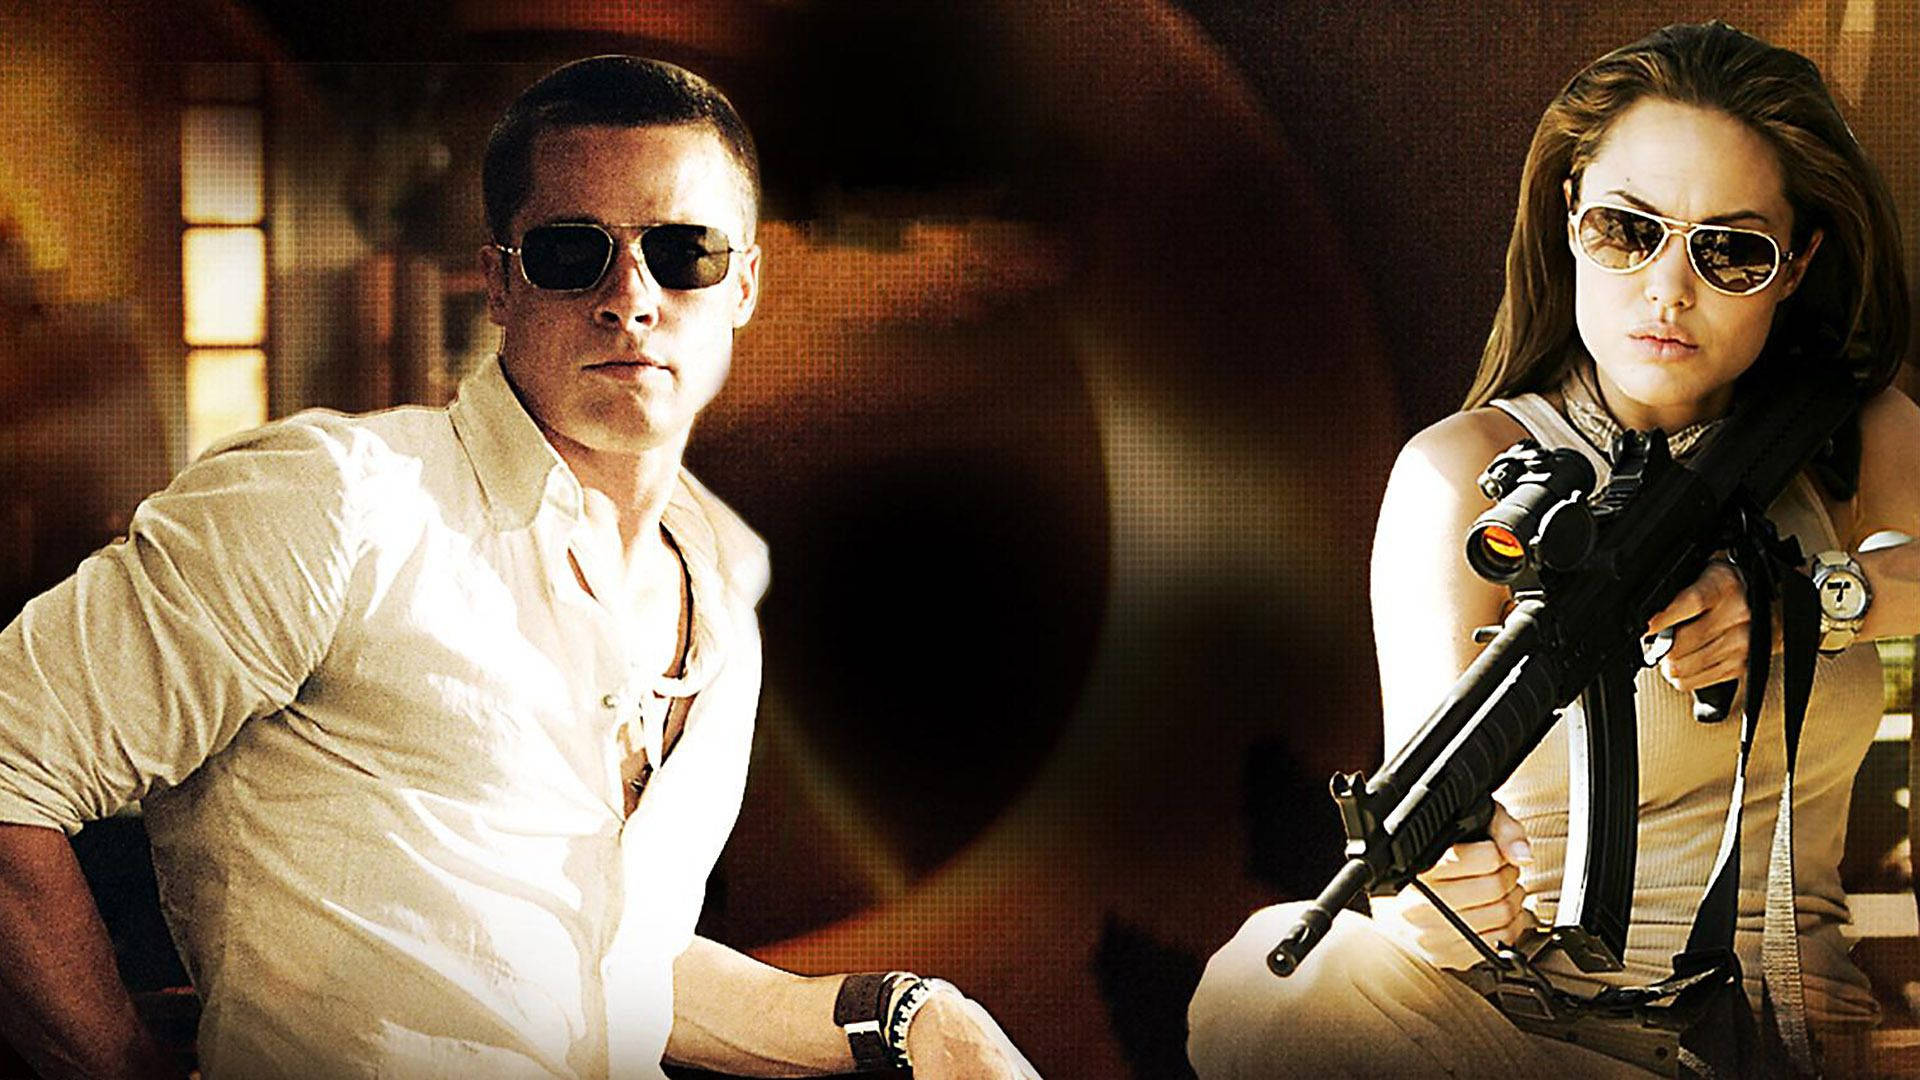 Mr. And Mrs. Smith Shooting Scene Wallpaper